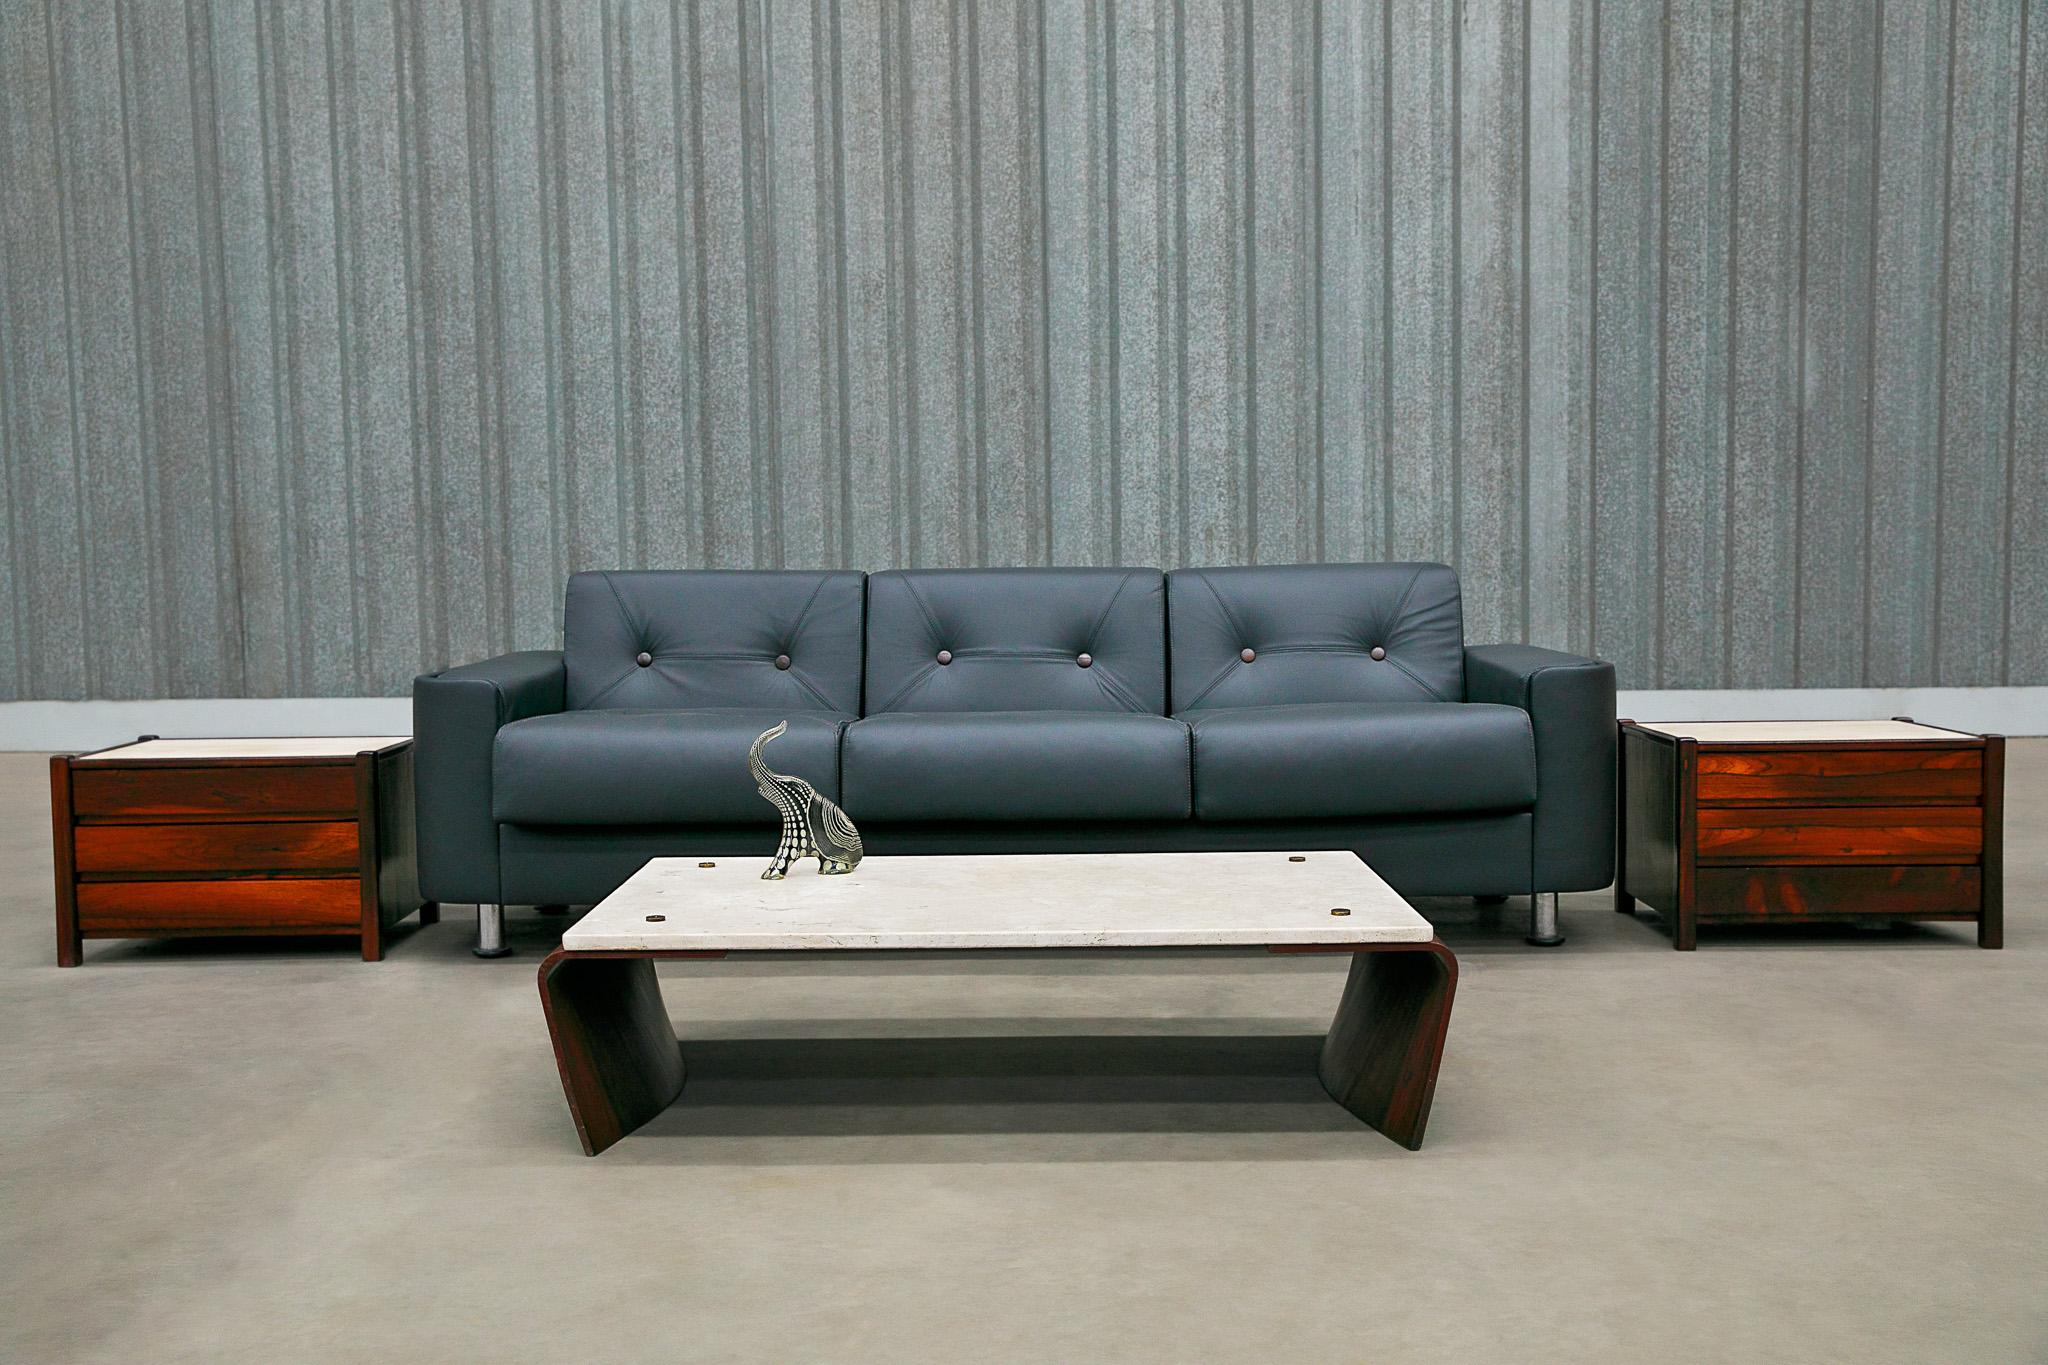 Mid-Century Modern Sofa in Black Leather & Wood by Jorge Zalszupin, Brazil, 1970 For Sale 2